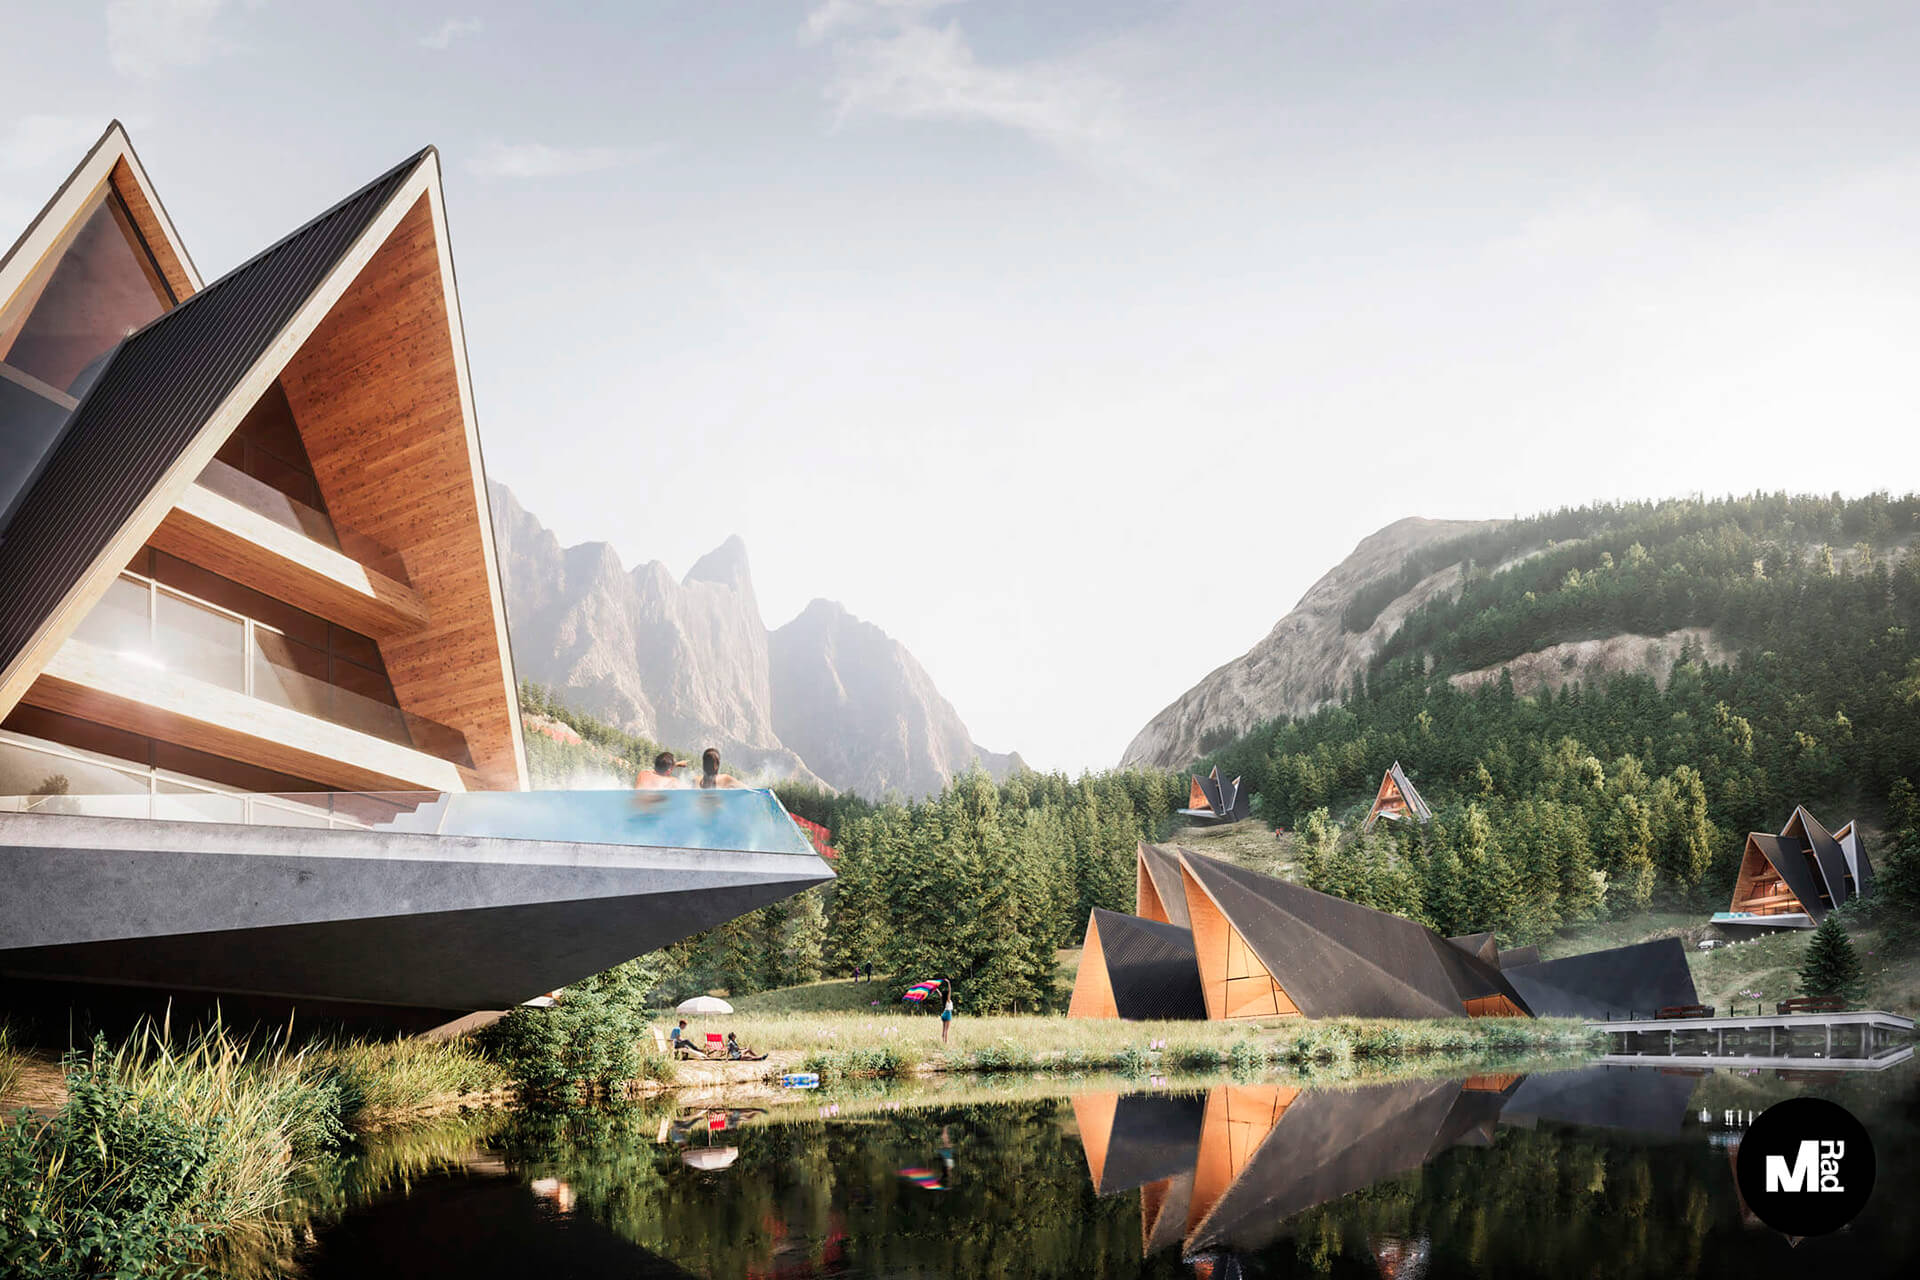 Photorealistic Daytime 3D Rendering of a Hotel Complex by the Lake